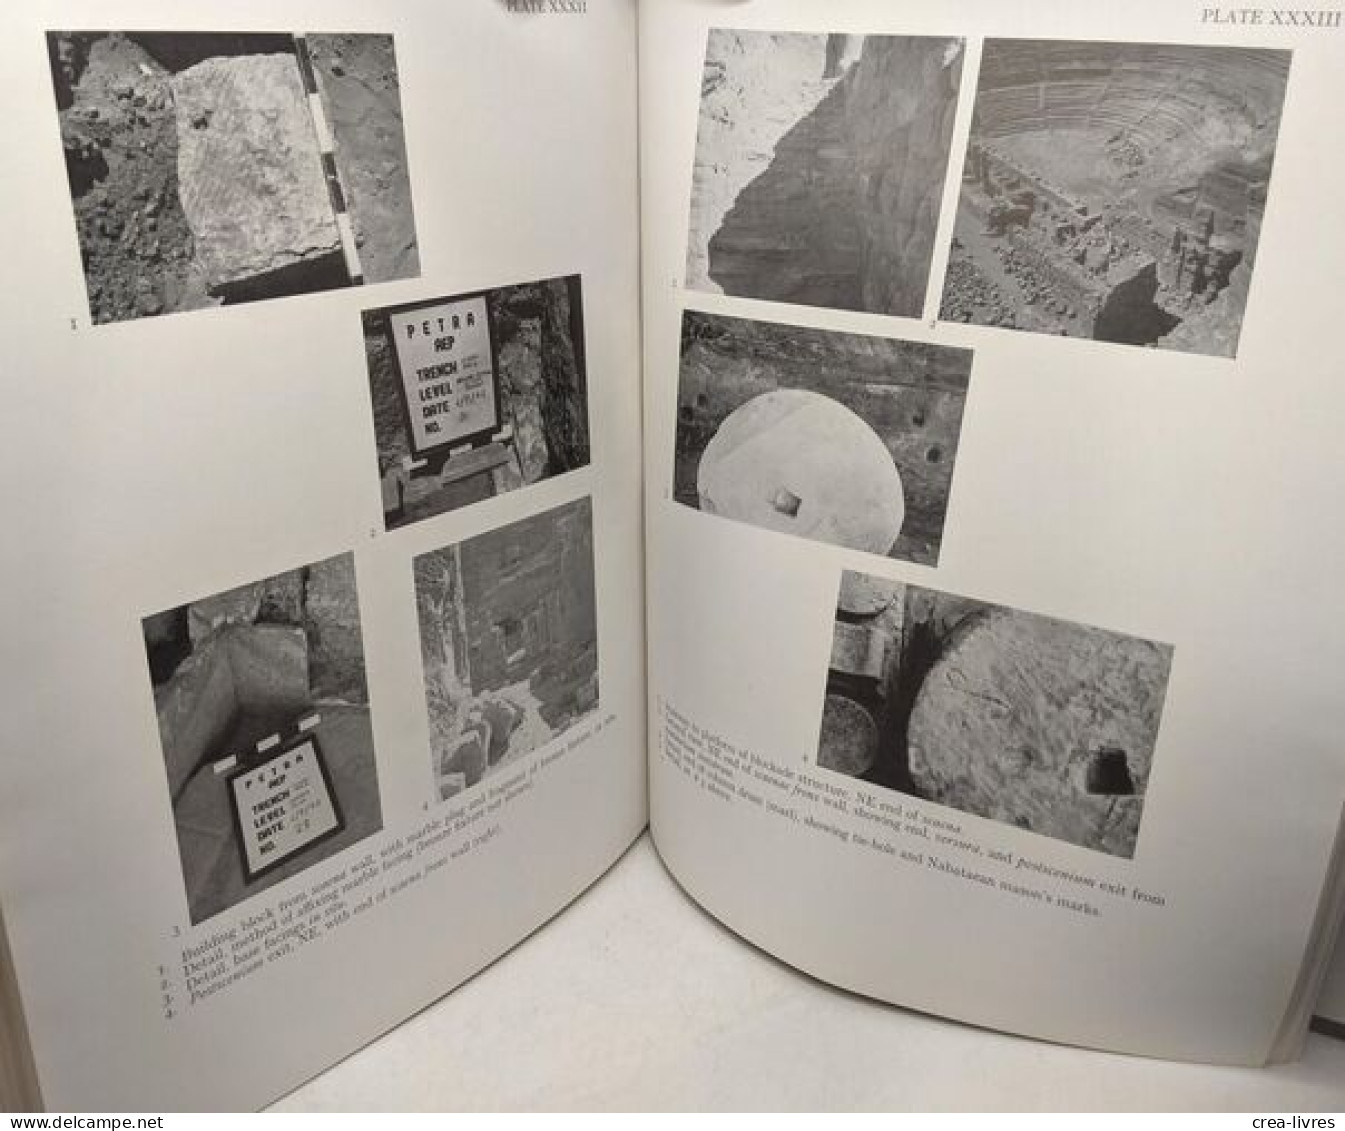 The excavation of the main theater at Petra 1961-1962 final report